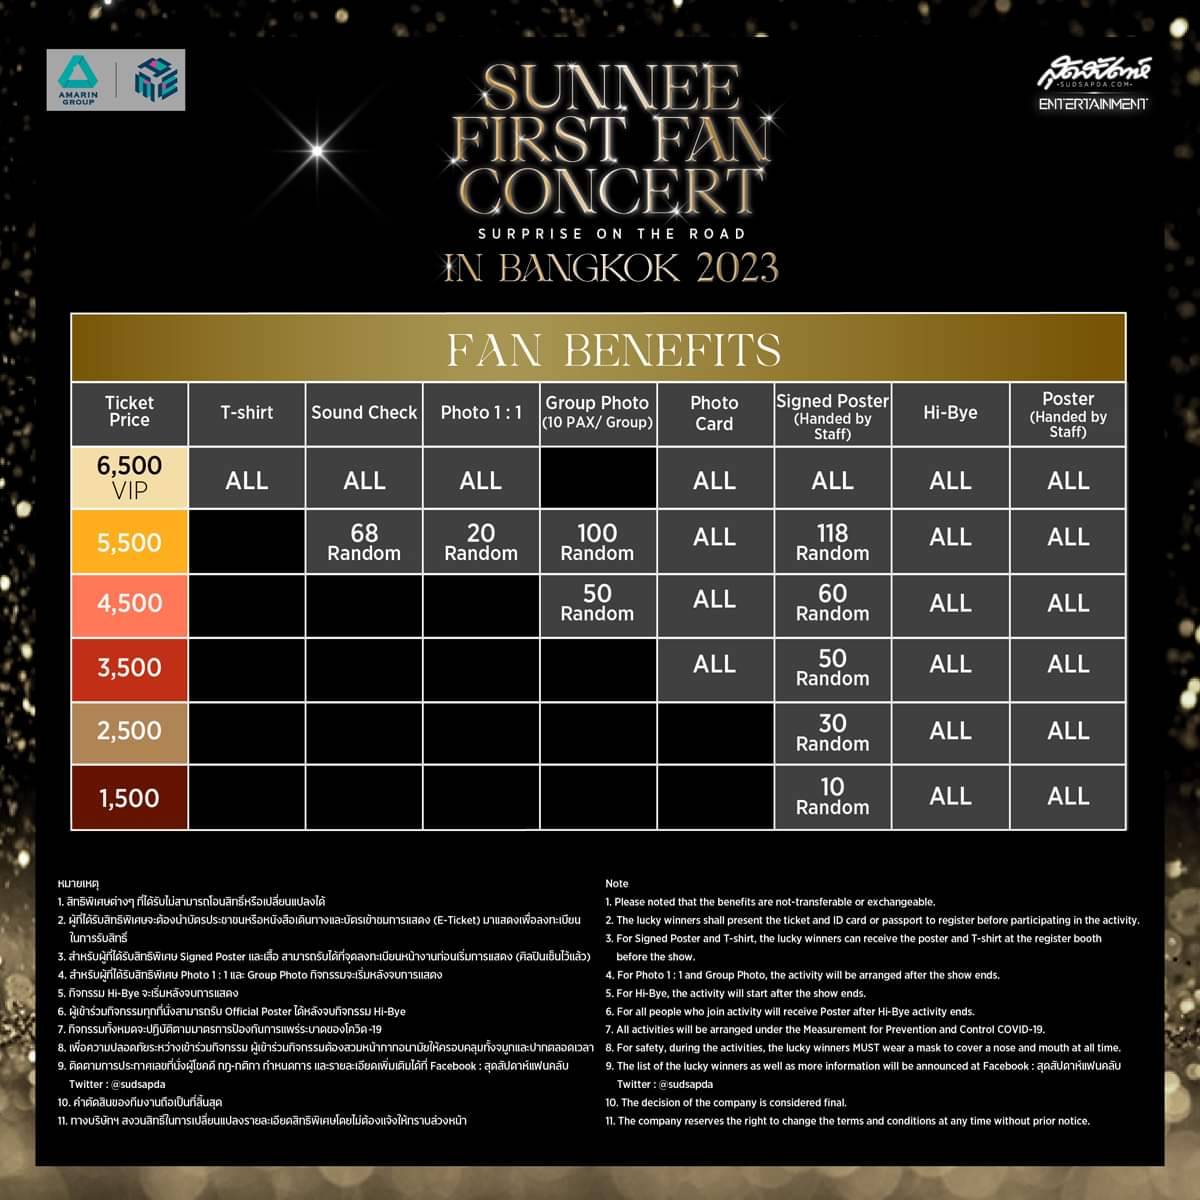 SUNNEE FIRST FAN CONCERT ‘SURPRISE ON THE ROAD’ IN BANGKOK 2023